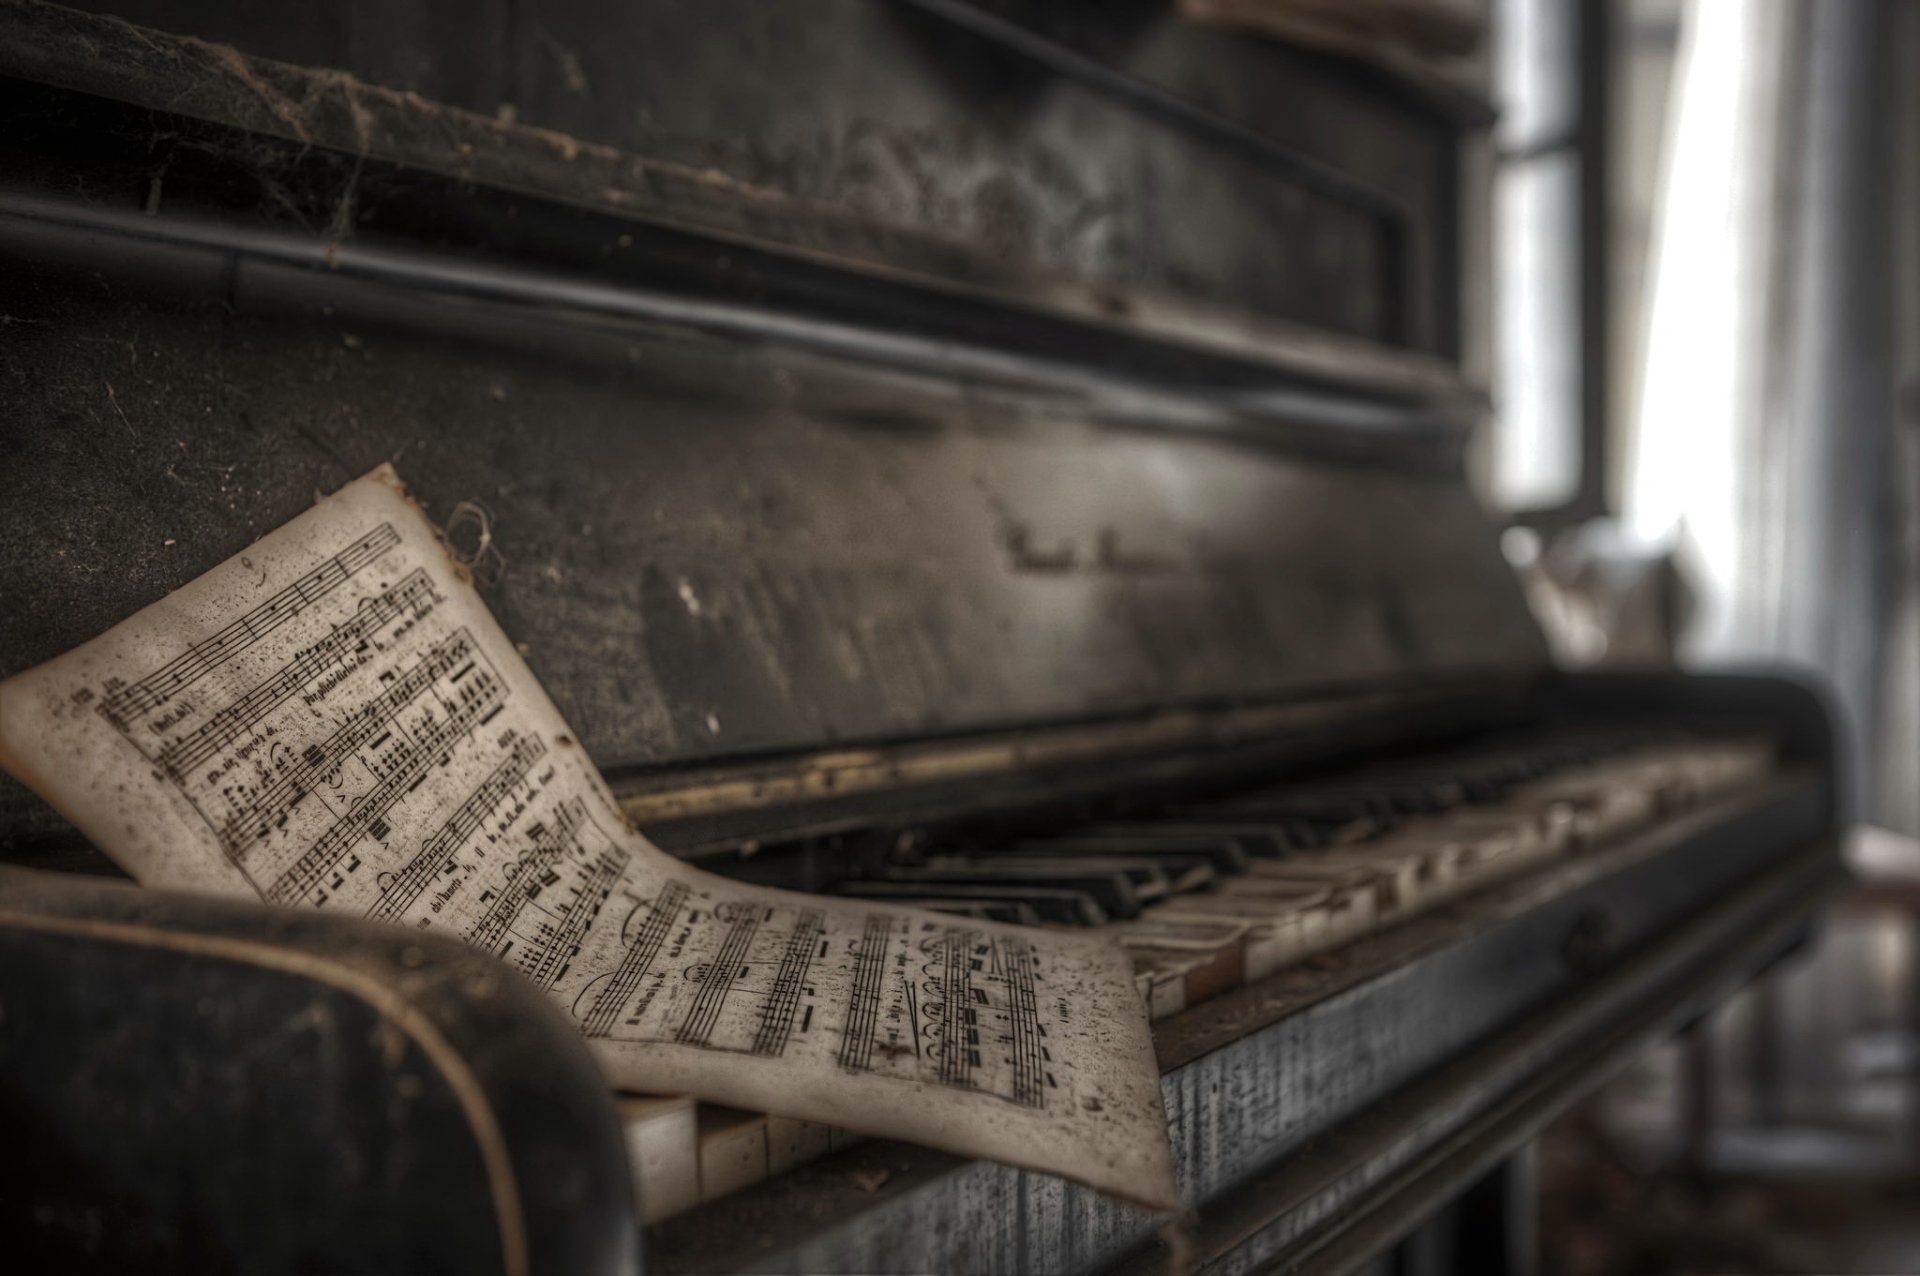 Piano: An Old Musical Instrument, Keyboard Family, Musical Notes. 1920x1280 HD Wallpaper.